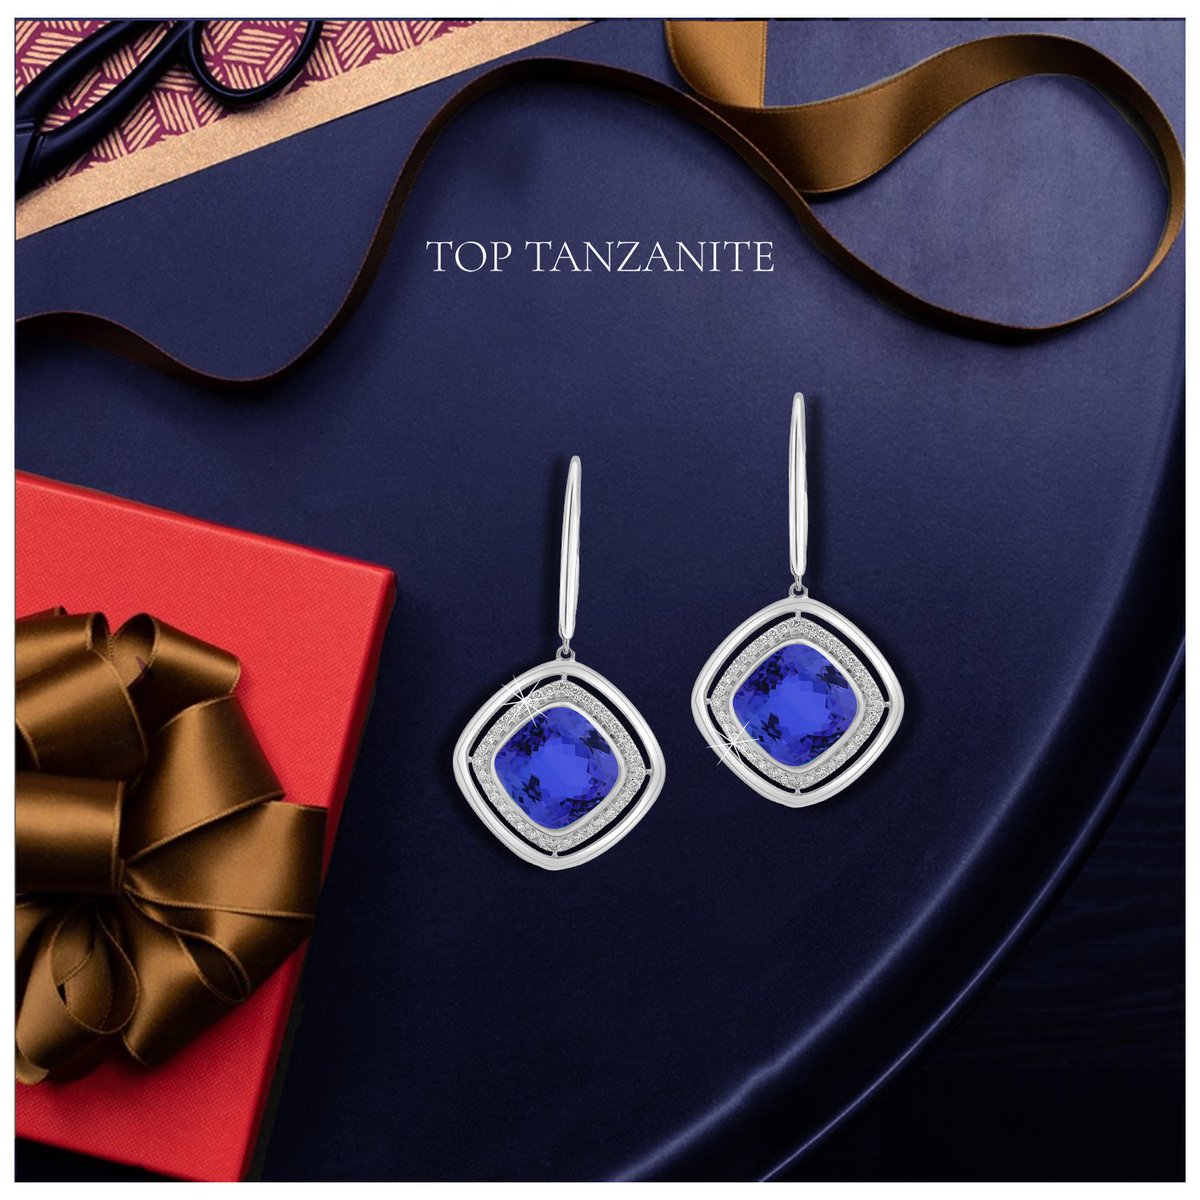 The lustrous cushion-shaped violetish blue tanzanite is elegantly encircled by a halo of sparkling white diamonds. Add a hint of genuine glow to your appeal. #tanzanitejewelery #gemstonelover #minetomarket #NewYorkJewelry #jewelryUSA #jewelryonline #NewYorkCity  #USA